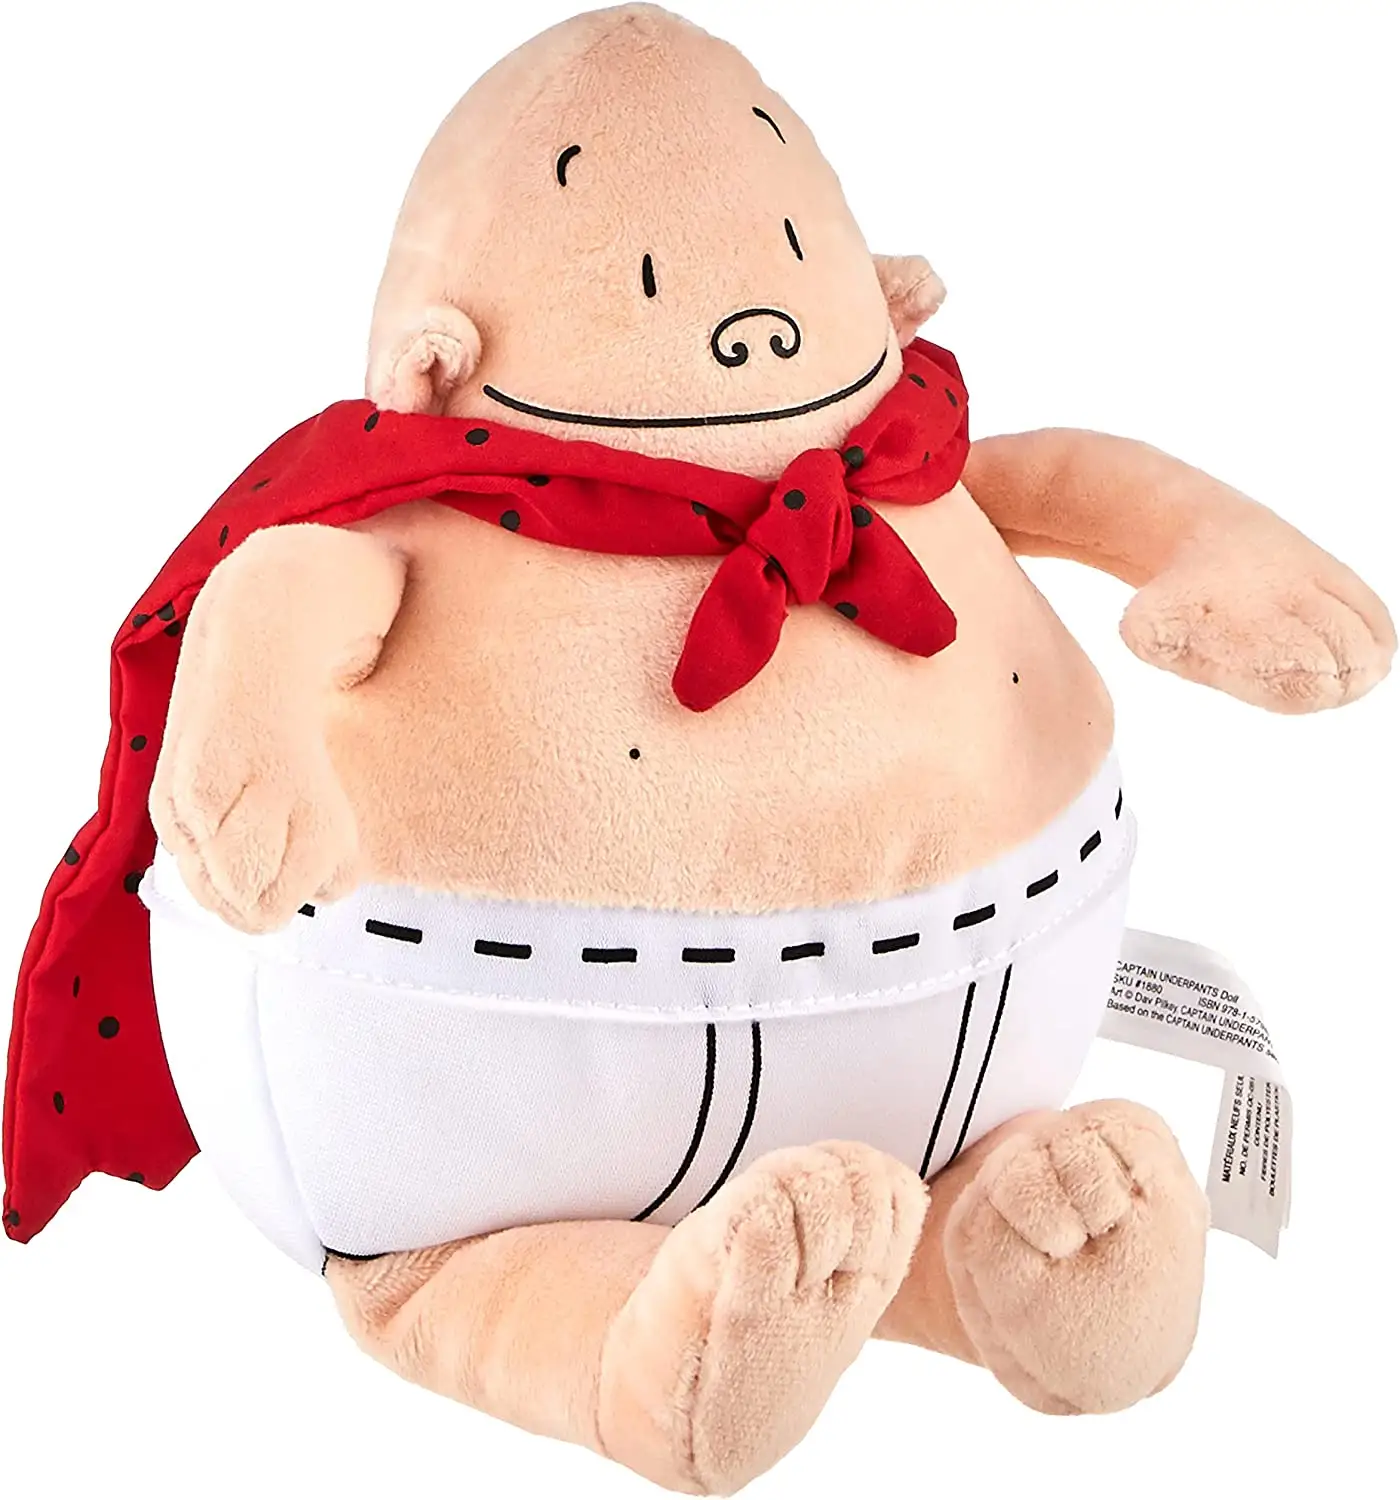 Captain Underpants Soft Superhero Toy from The bestselling Comic Book Series by Dav Pilkey